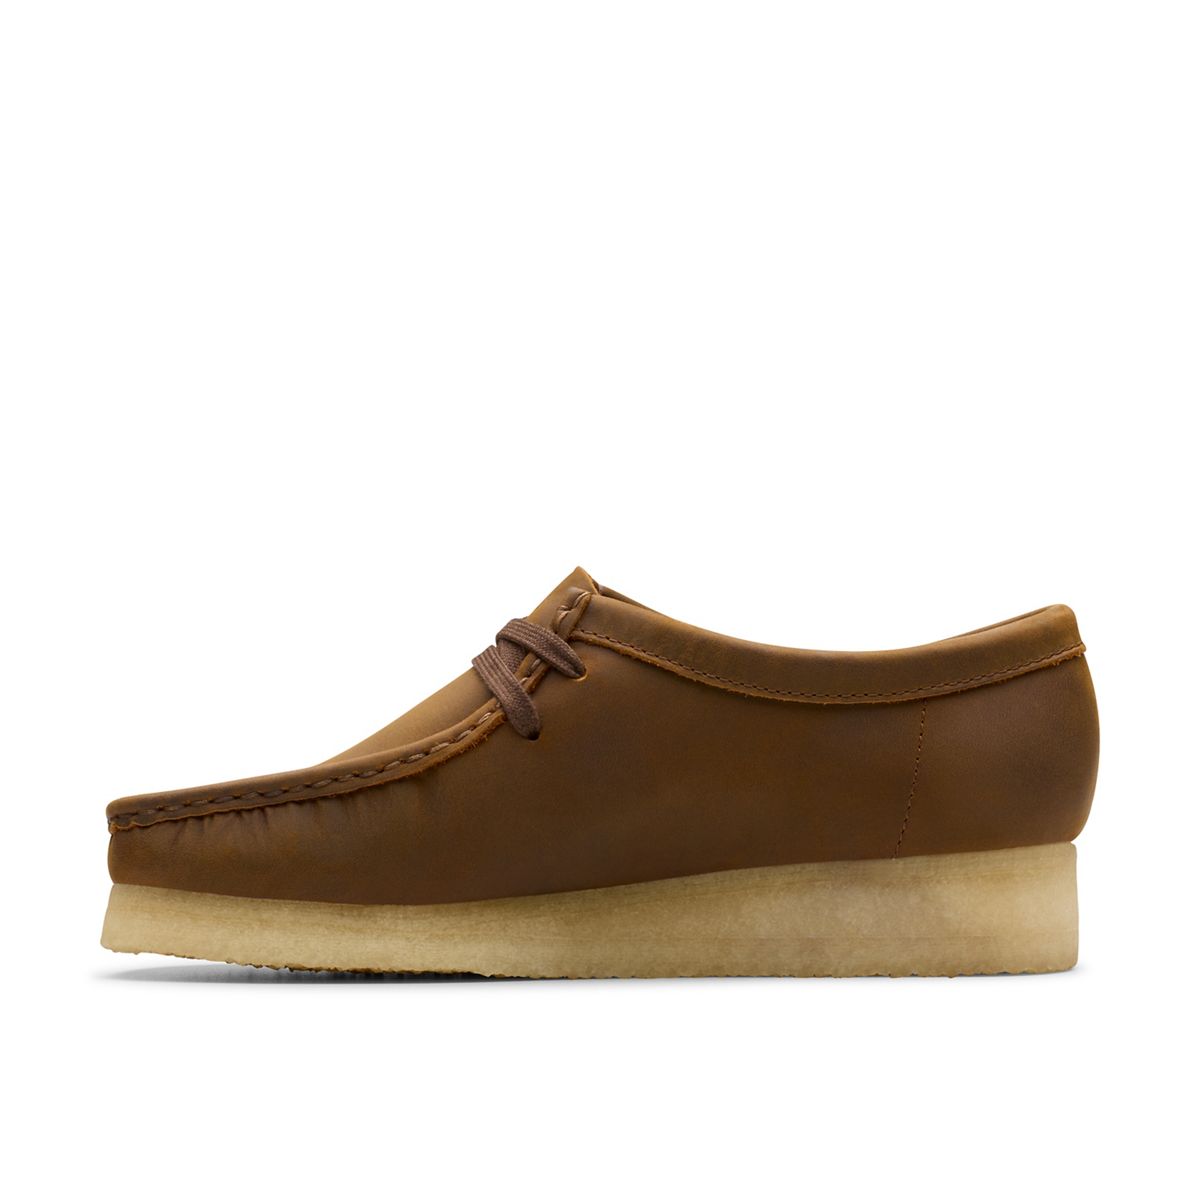 Beeswax - Clarks Canada Site Clarks Shoes